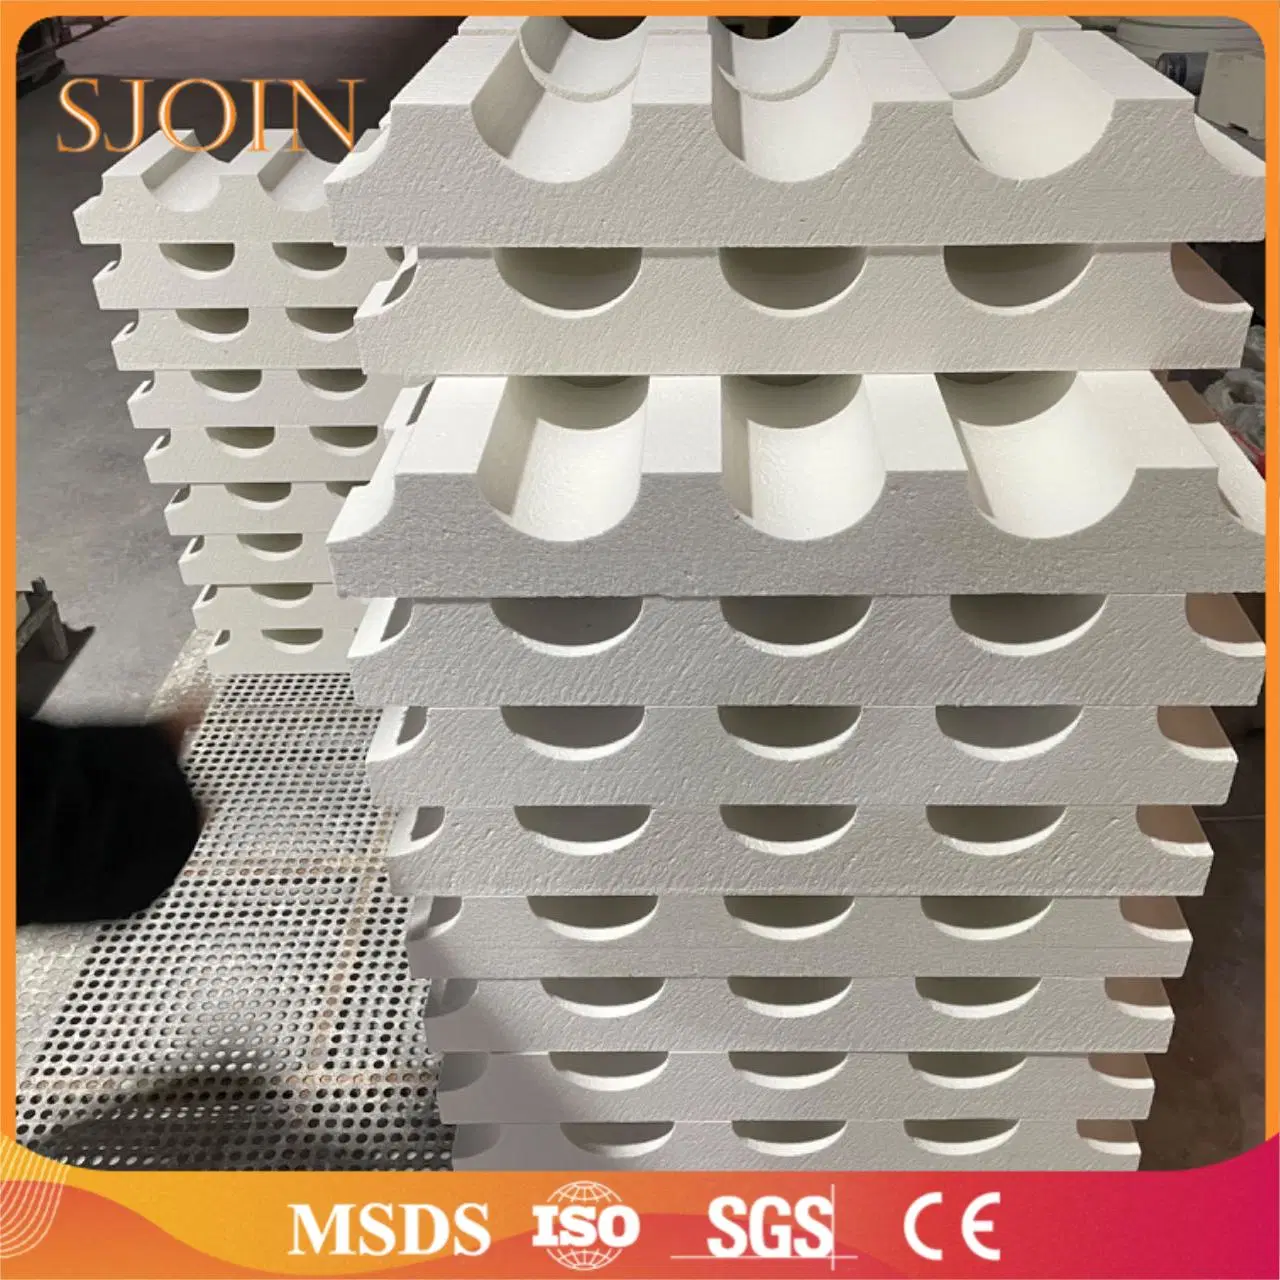 15. Glass Tempering Furnace Kiln Roller End Side Seal Insulation Refractory Shapes